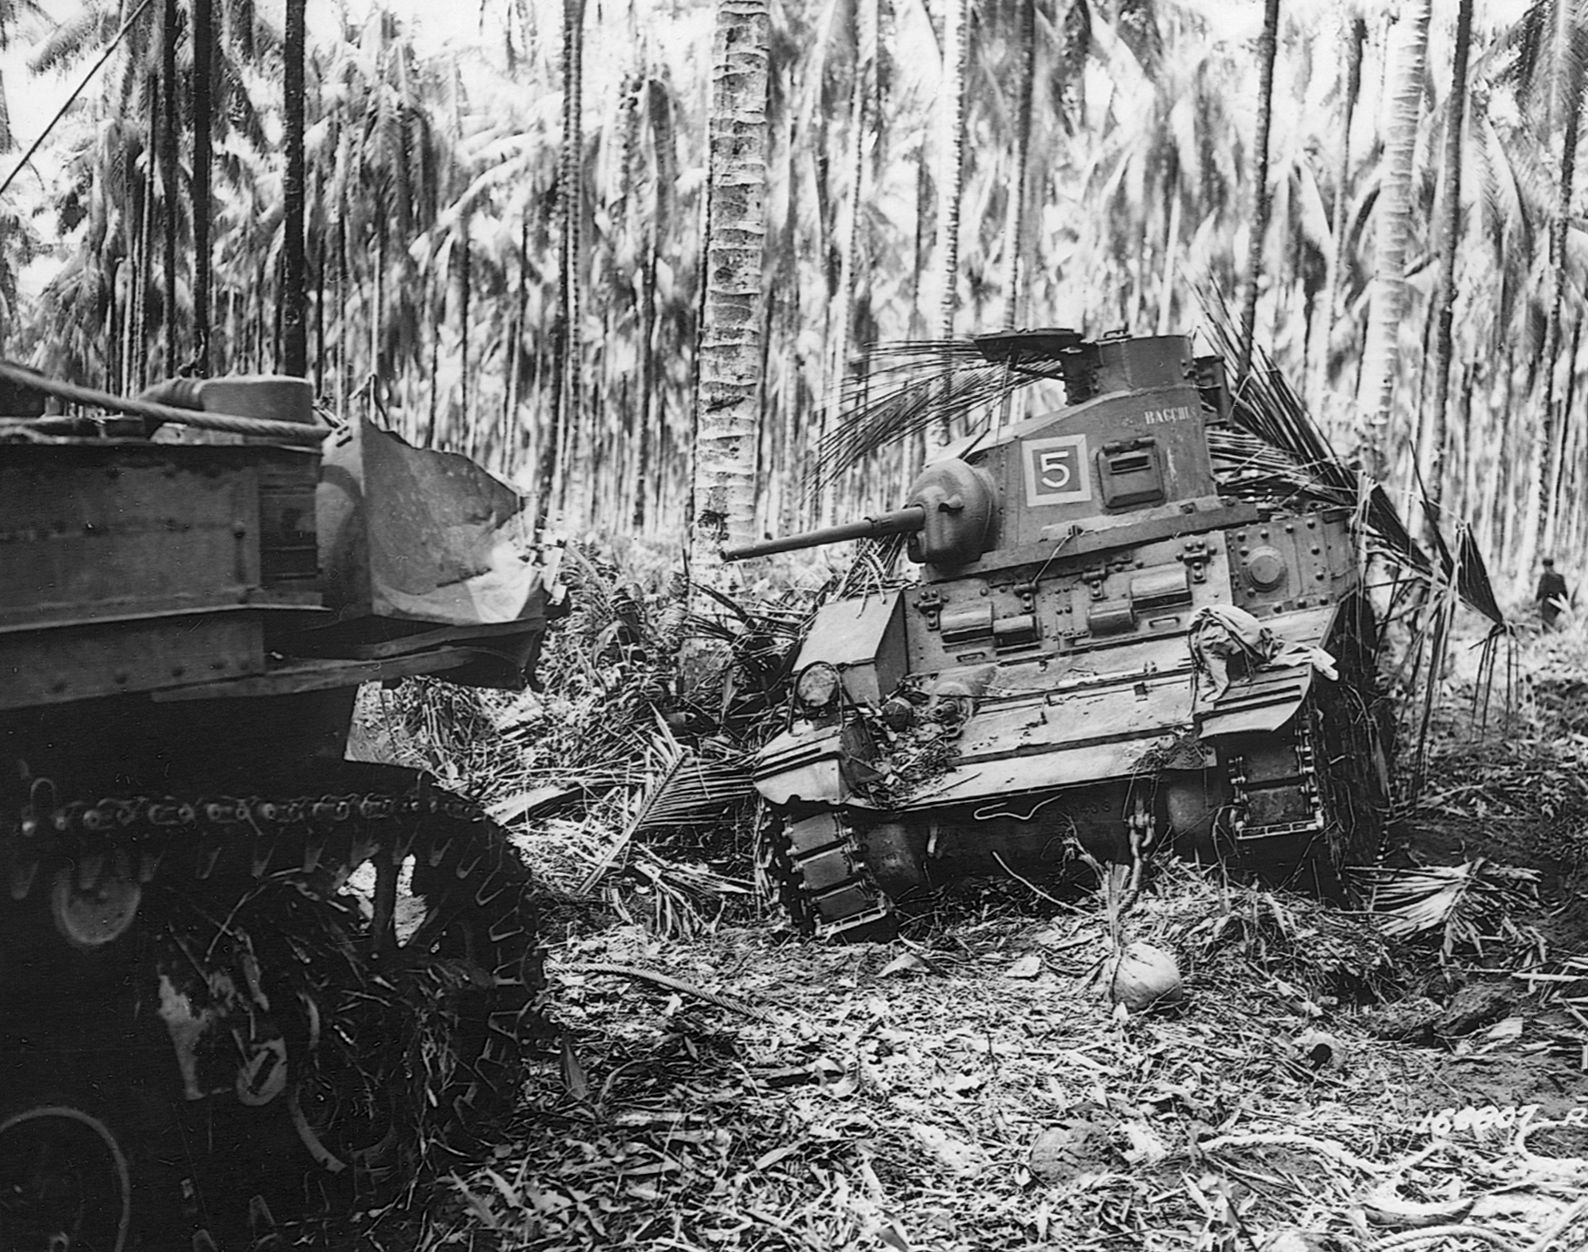 The jungle was so thick that even armor had trouble maneuvering. Here, a Stuart light tank used by the Australians guards a clearing in New Guinea, November 1942. 